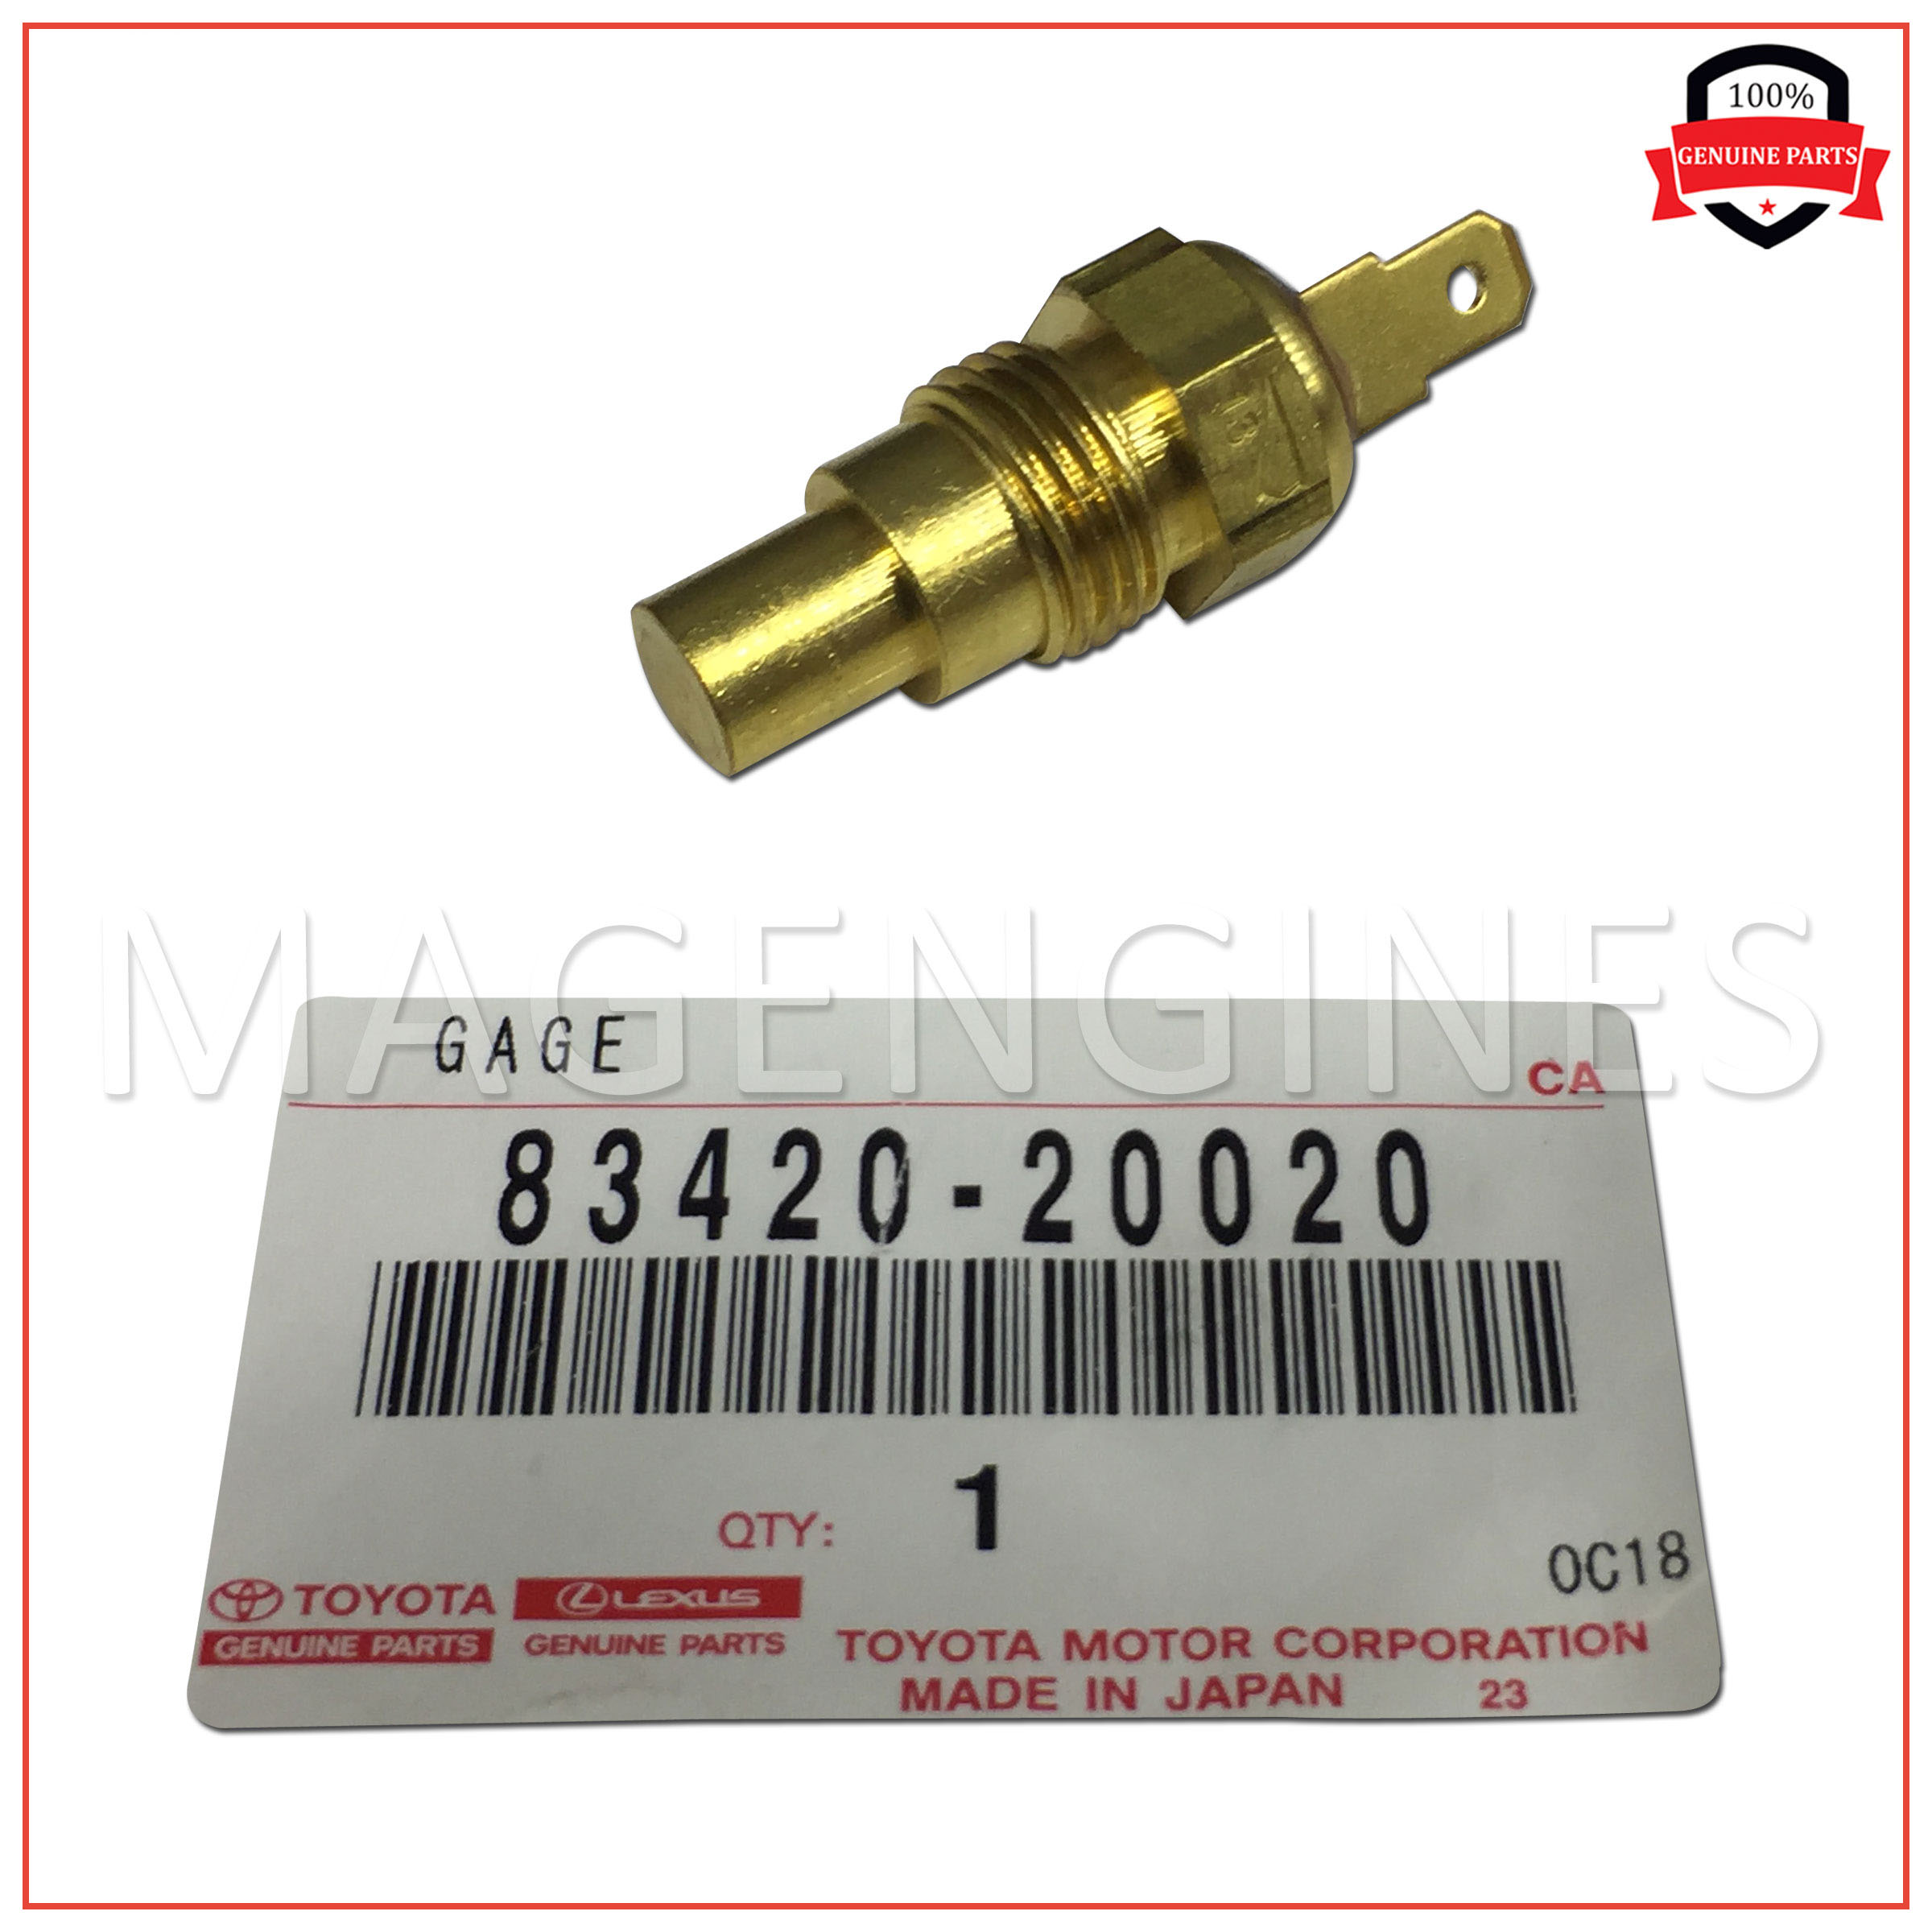 SENSOR FOR TOYOTA FORKLIFTS & AUTO MT025 83420-76001-71 83420-20020  WATER TEMP 